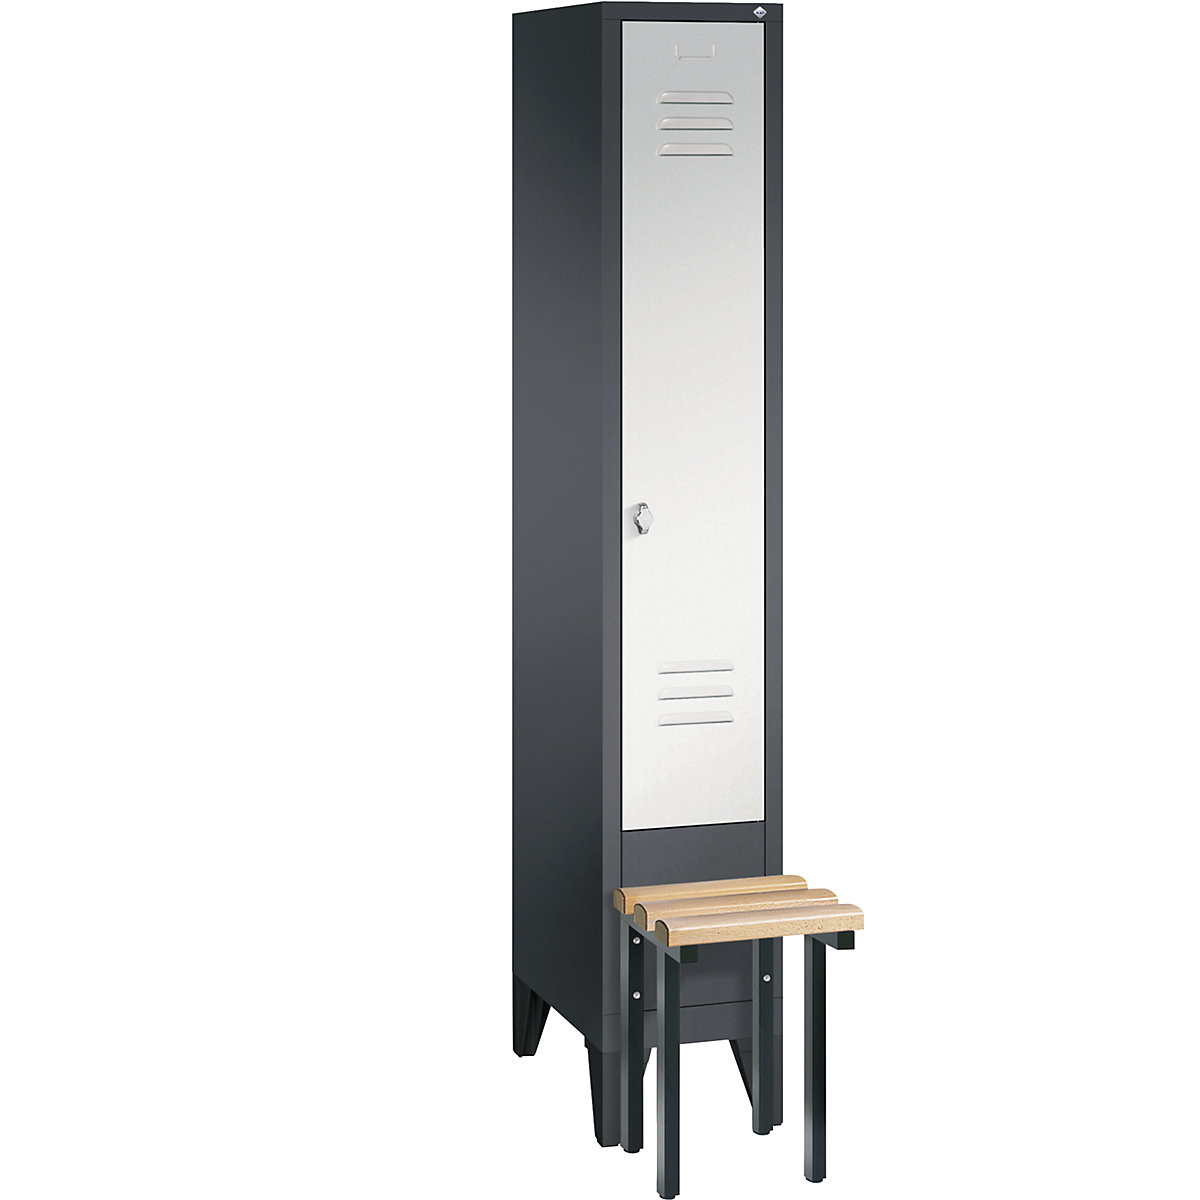 CLASSIC cloakroom locker with bench mounted in front – C+P